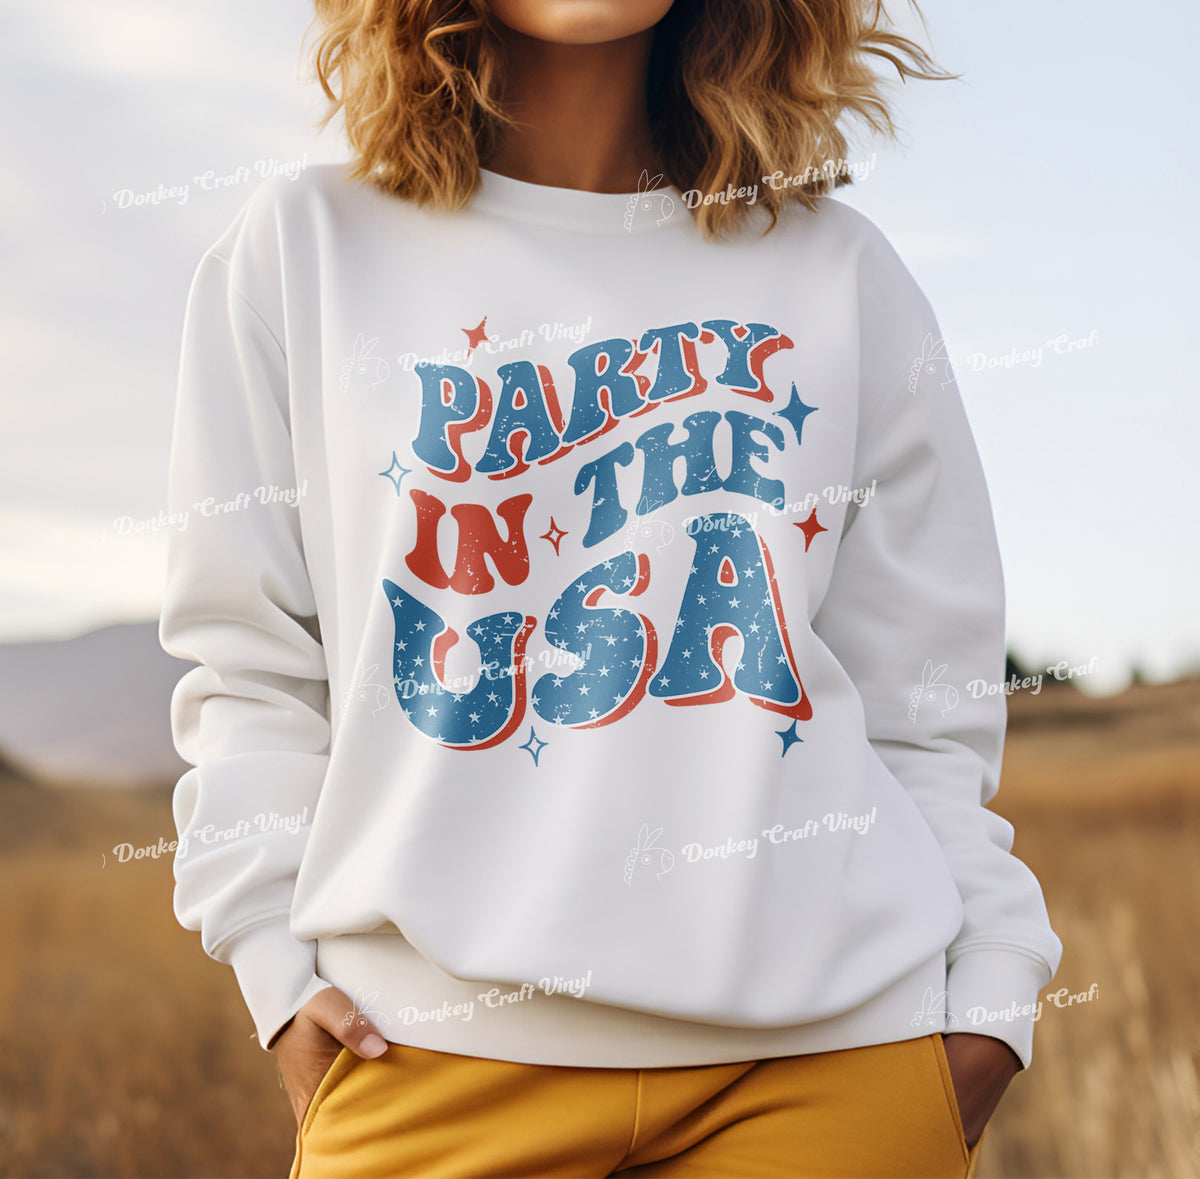 Patriotic 4th July Party DTF Transfer for T-shirts, Hoodies, Heat Transfer, Ready for Press Heat Press Transfers DTF301